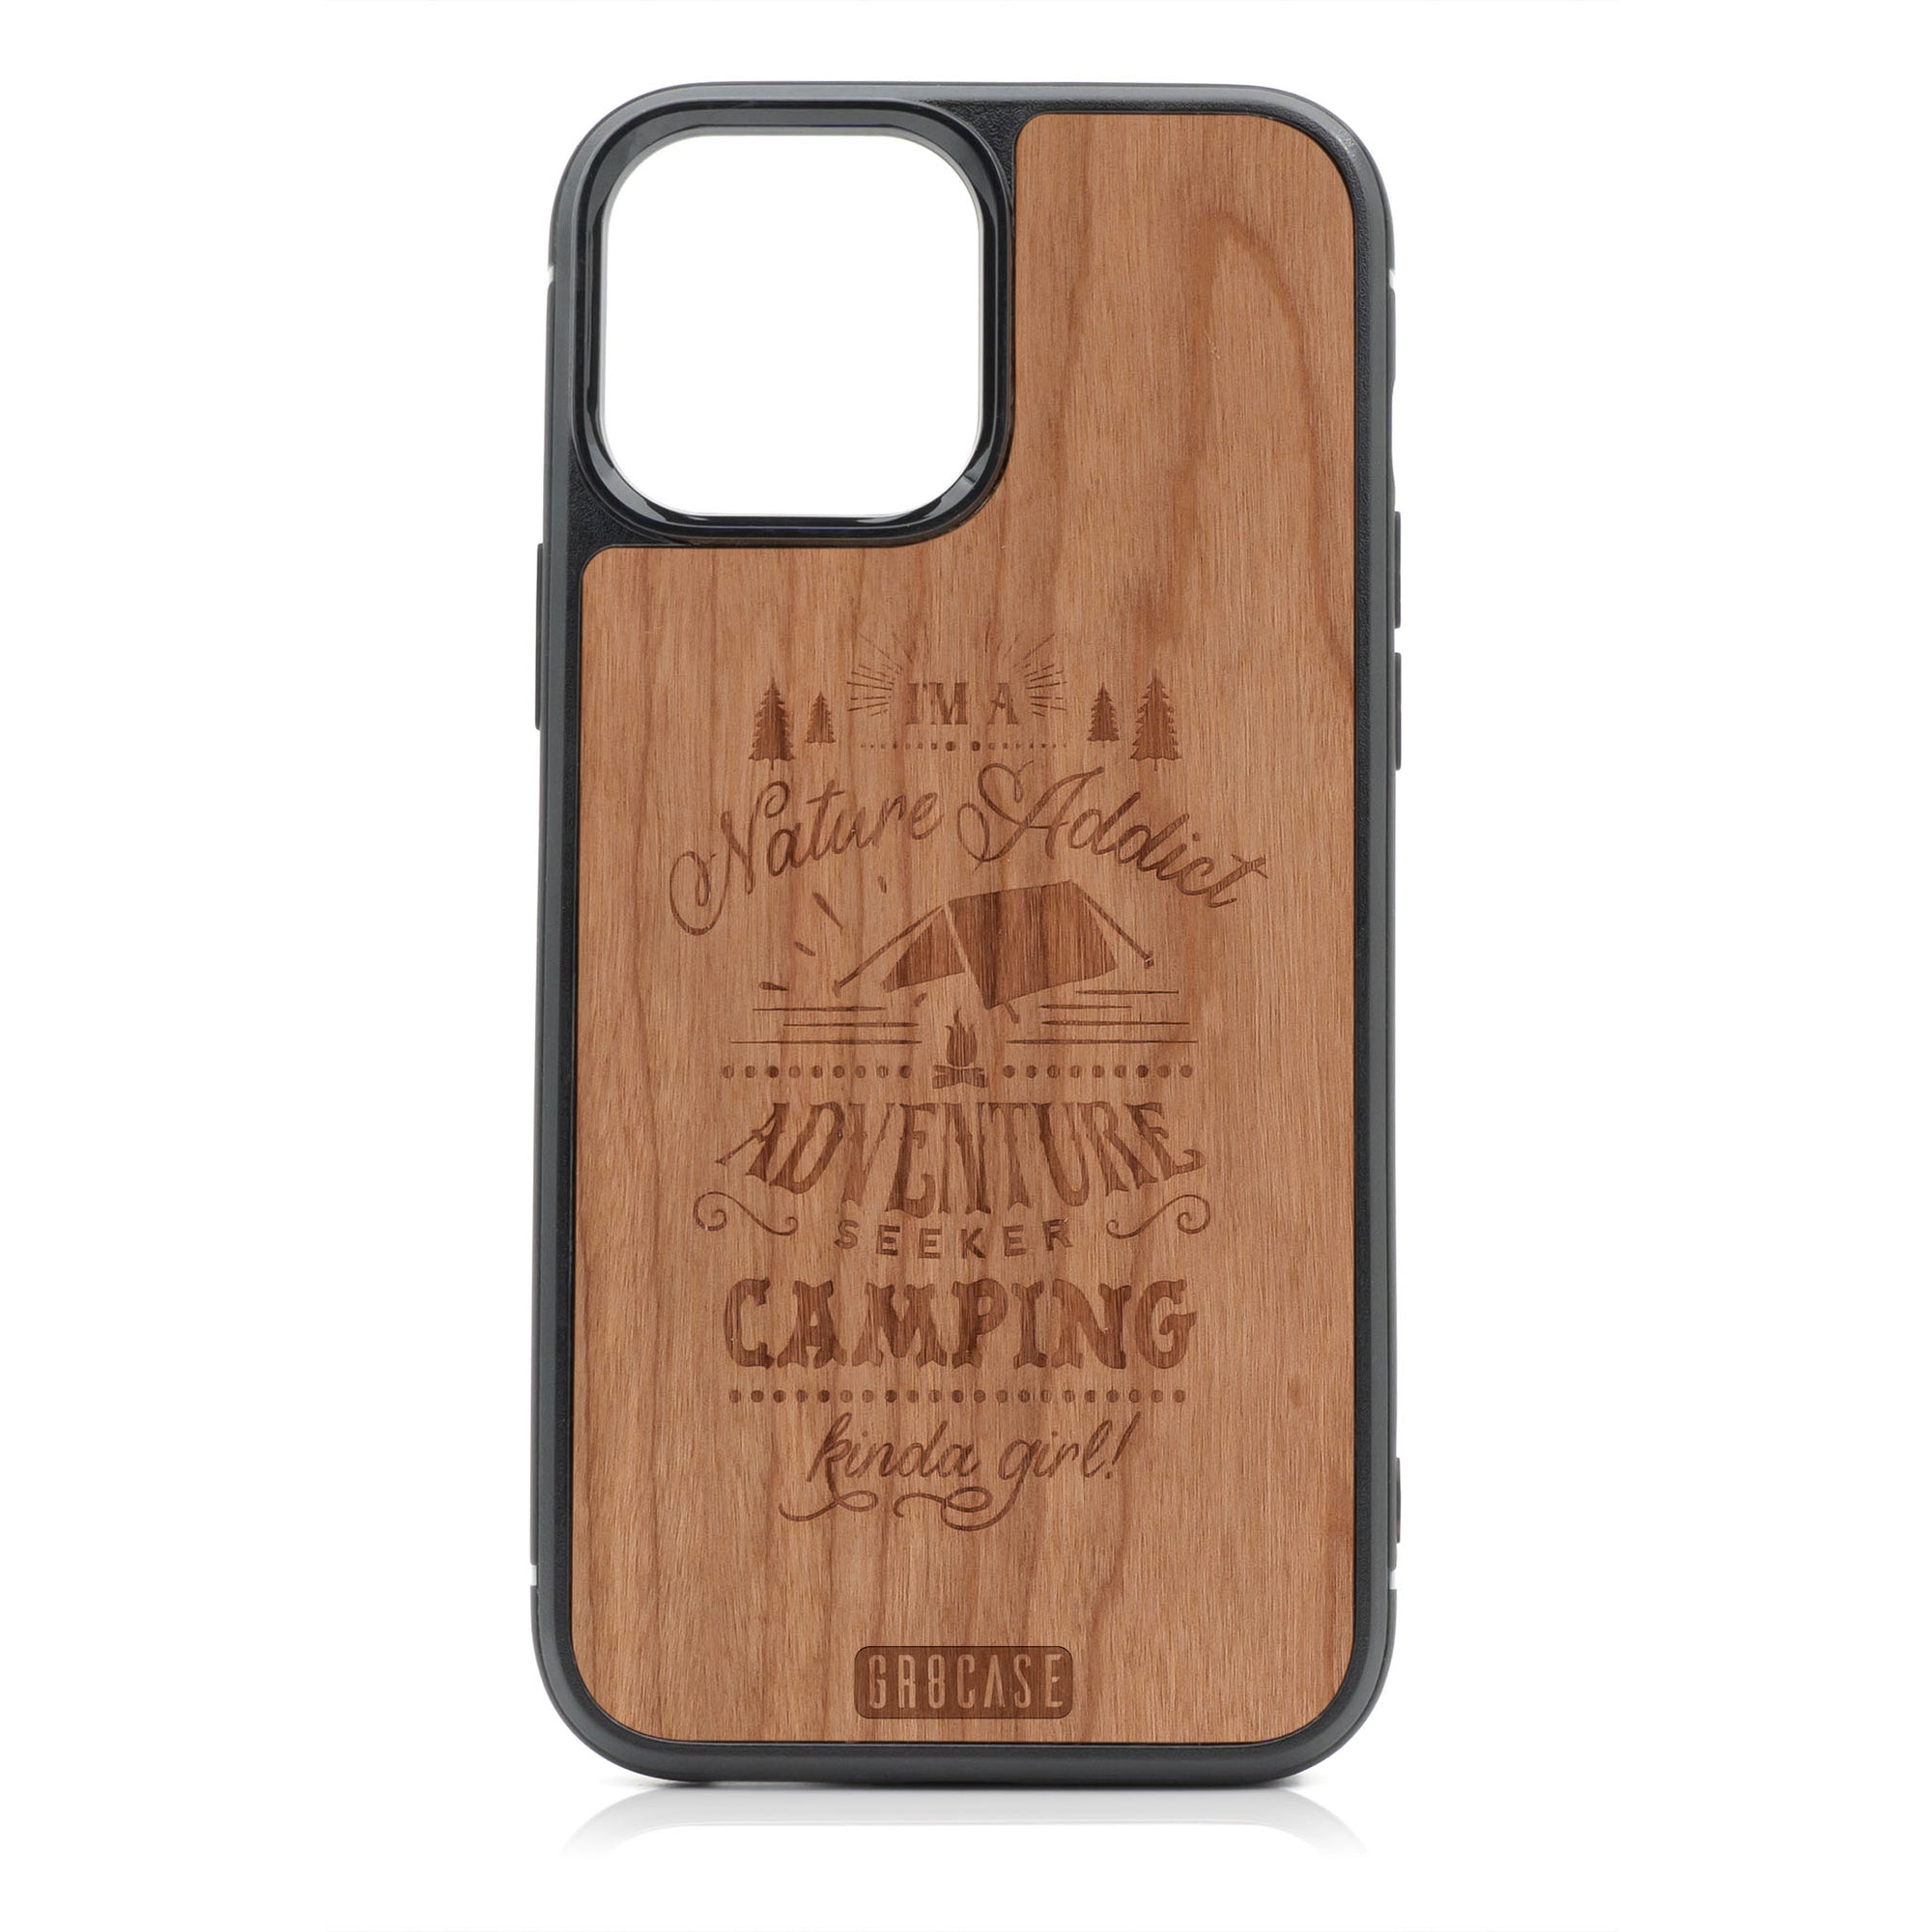 I'm A Nature Addict Adventure Seeker Camping Kinda Girl Design Wood Case For iPhone 13 Pro Max